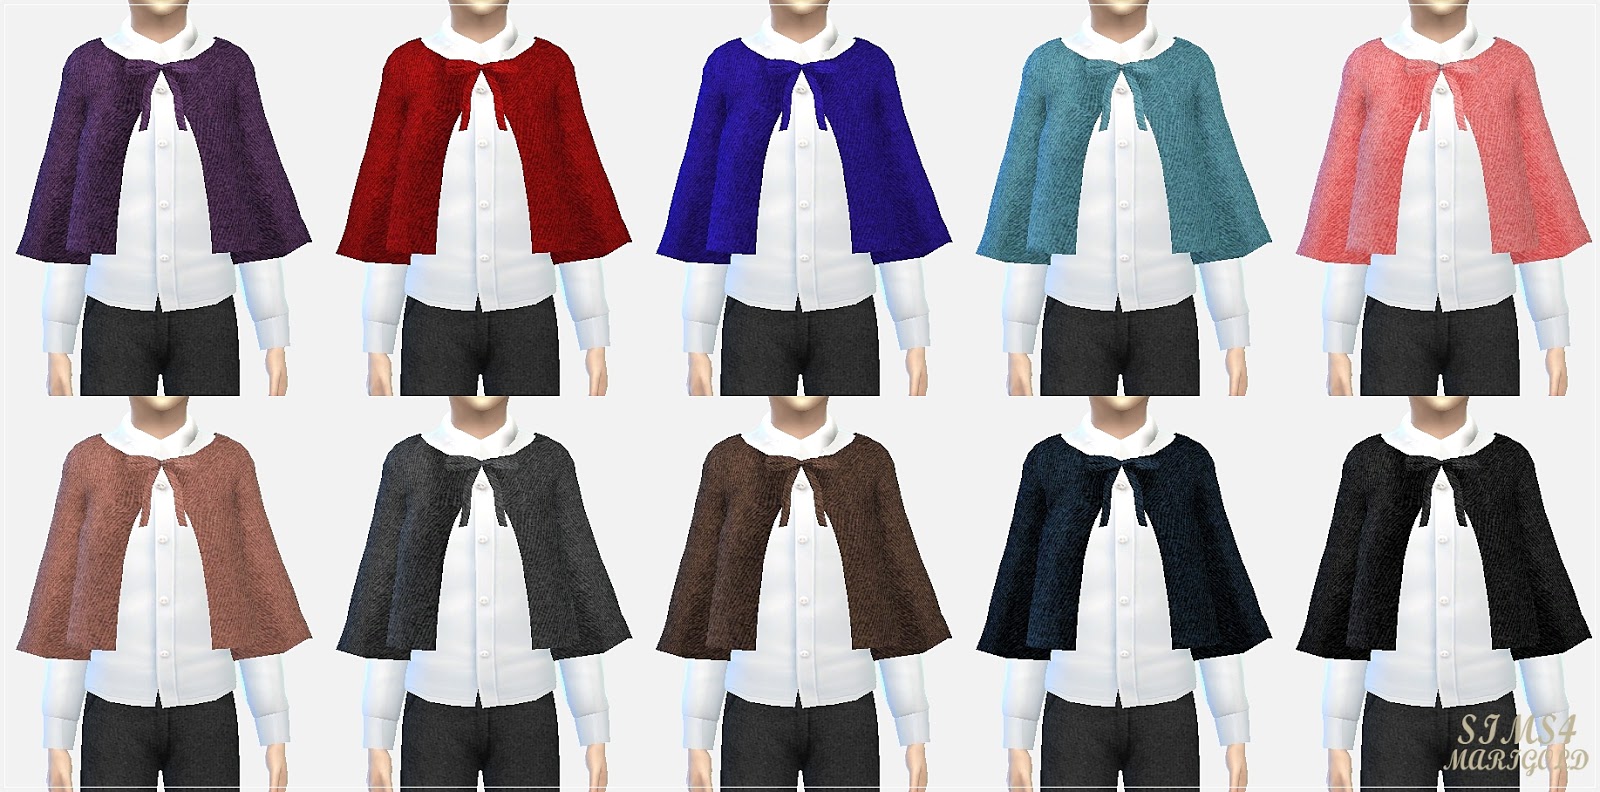 My Sims 4 Blog Woolen Cape For Boys And Girls And Shorts For Boys By